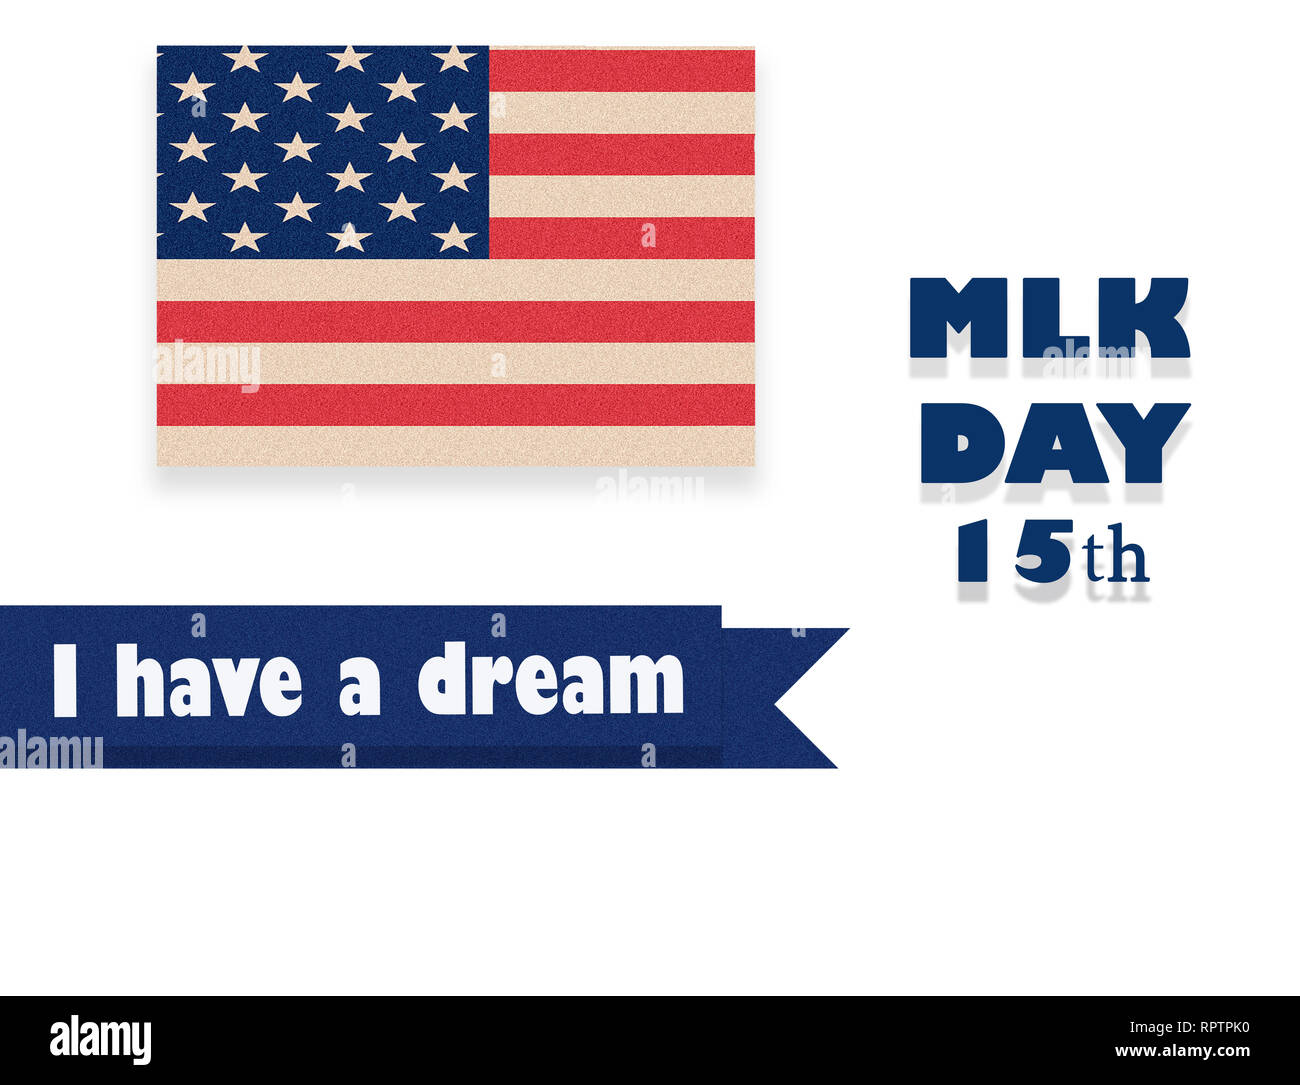 Martin Luther King Day illustration, I have a dream quote with USA flag waving. Stock Photo